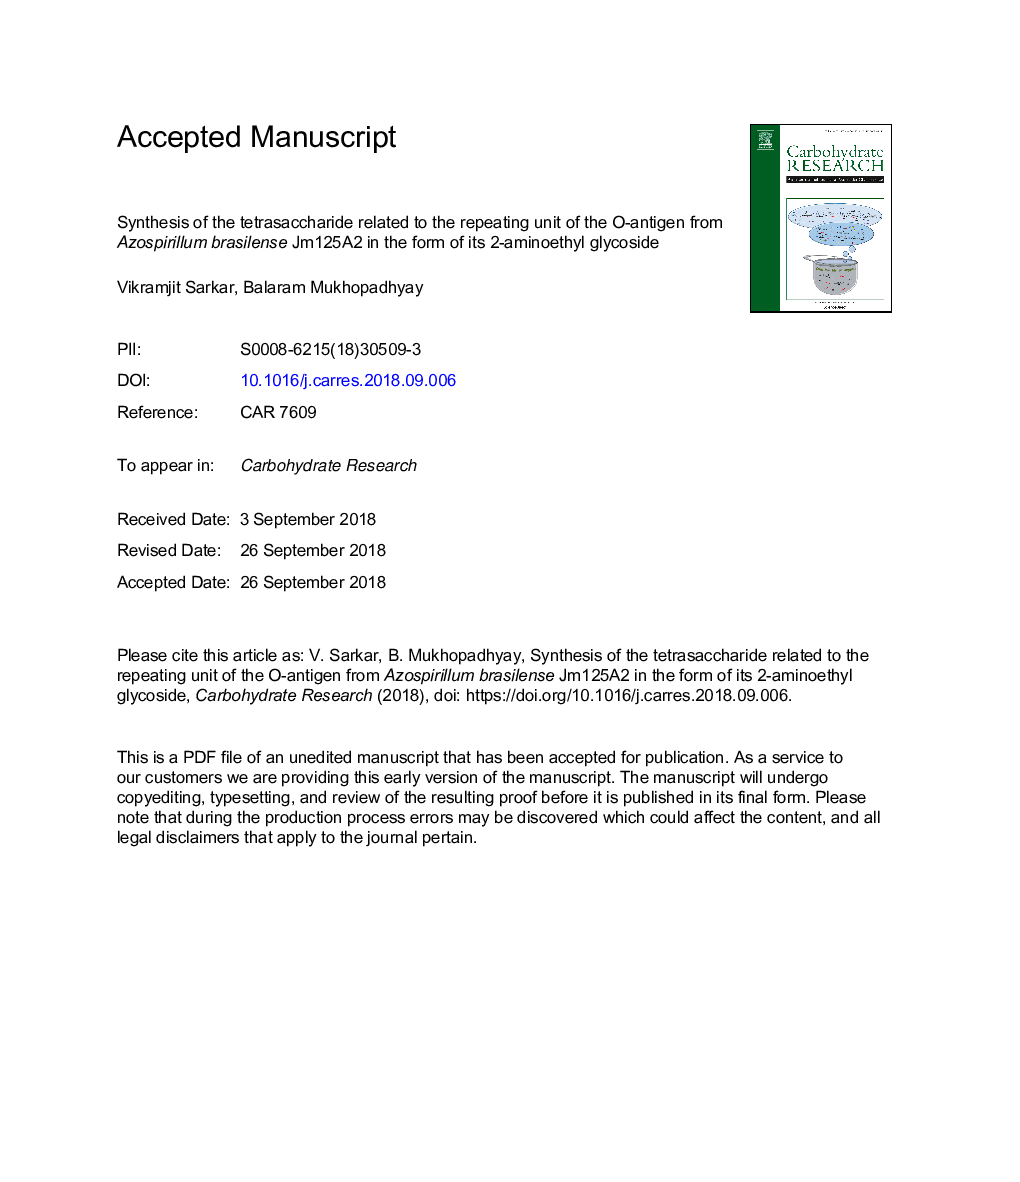 Synthesis of the tetrasaccharide related to the repeating unit of the O-antigen from Azospirillum brasilense Jm125A2 in the form of its 2-aminoethyl glycoside